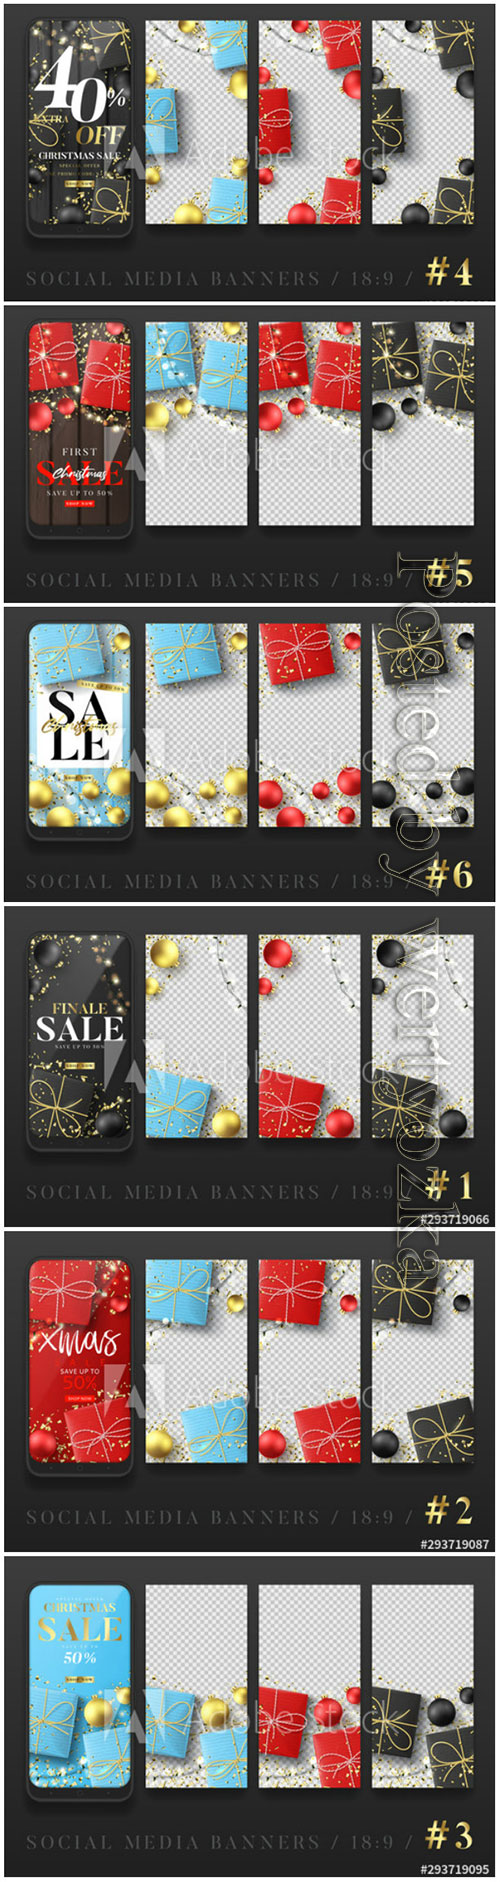 Promo template with realistic gift boxes, Christmas balls and